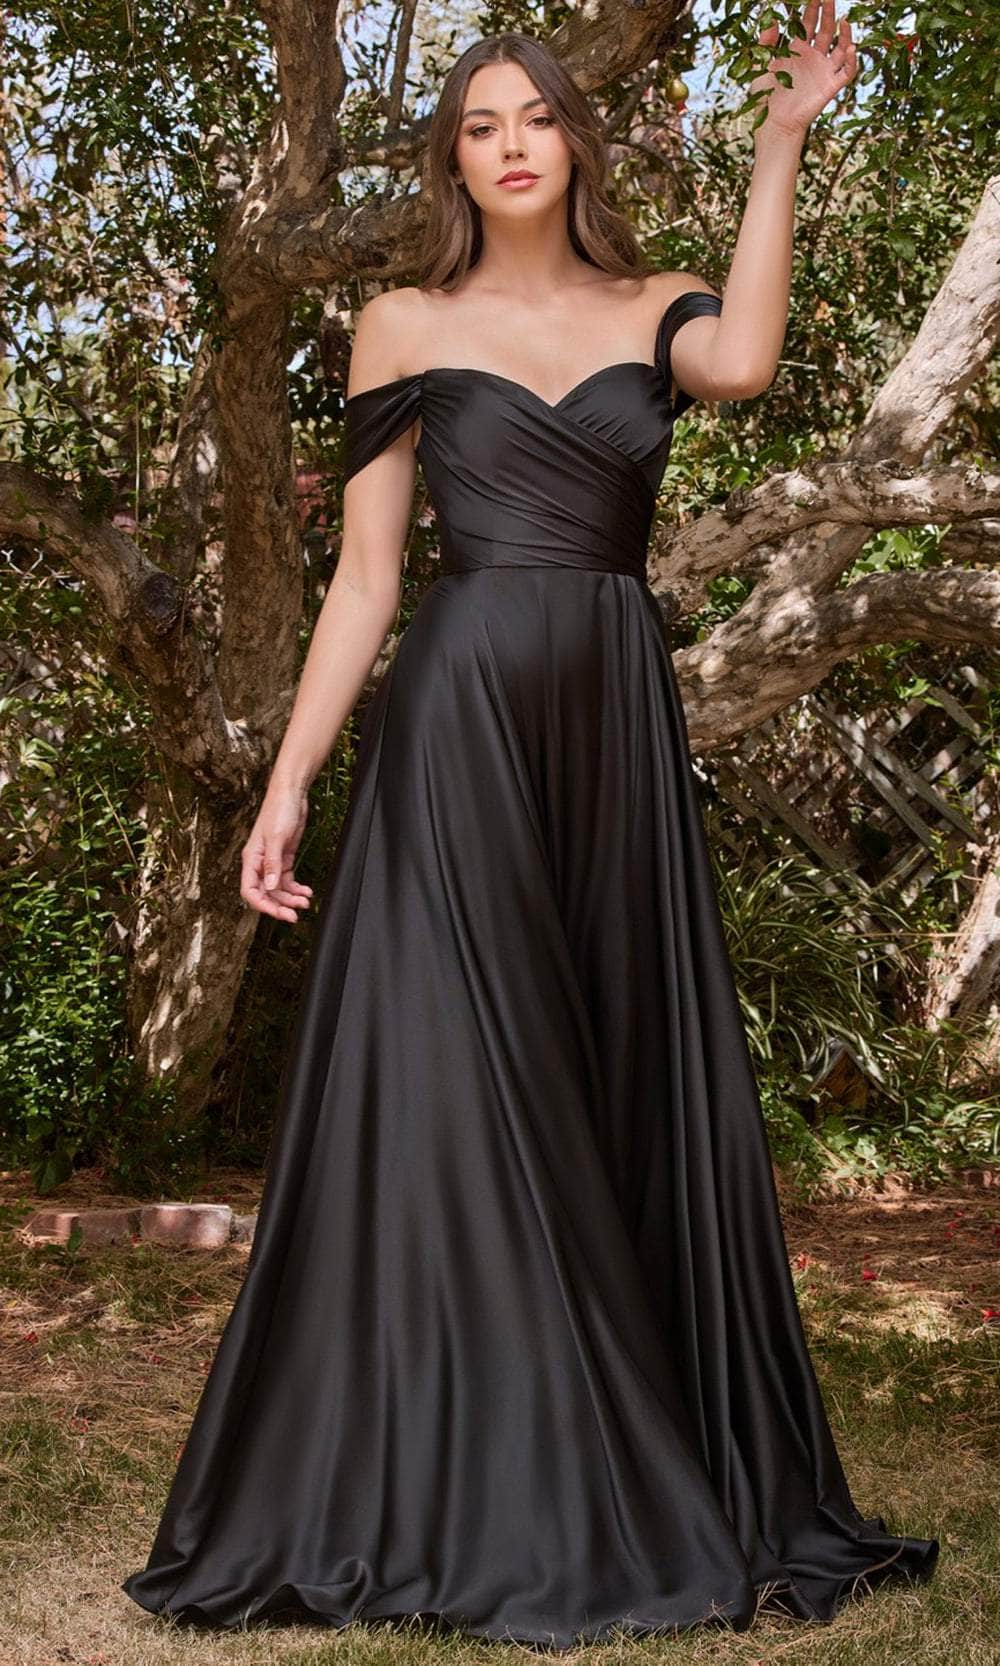 Black Satin Mermaid Black Evening Gown Dresses With Off Shoulder Deep V  Neck And Ruffles Perfect For Prom, Formal Reception And Womens Special  Occasions Style P324F From Ouri, $114.43 | DHgate.Com